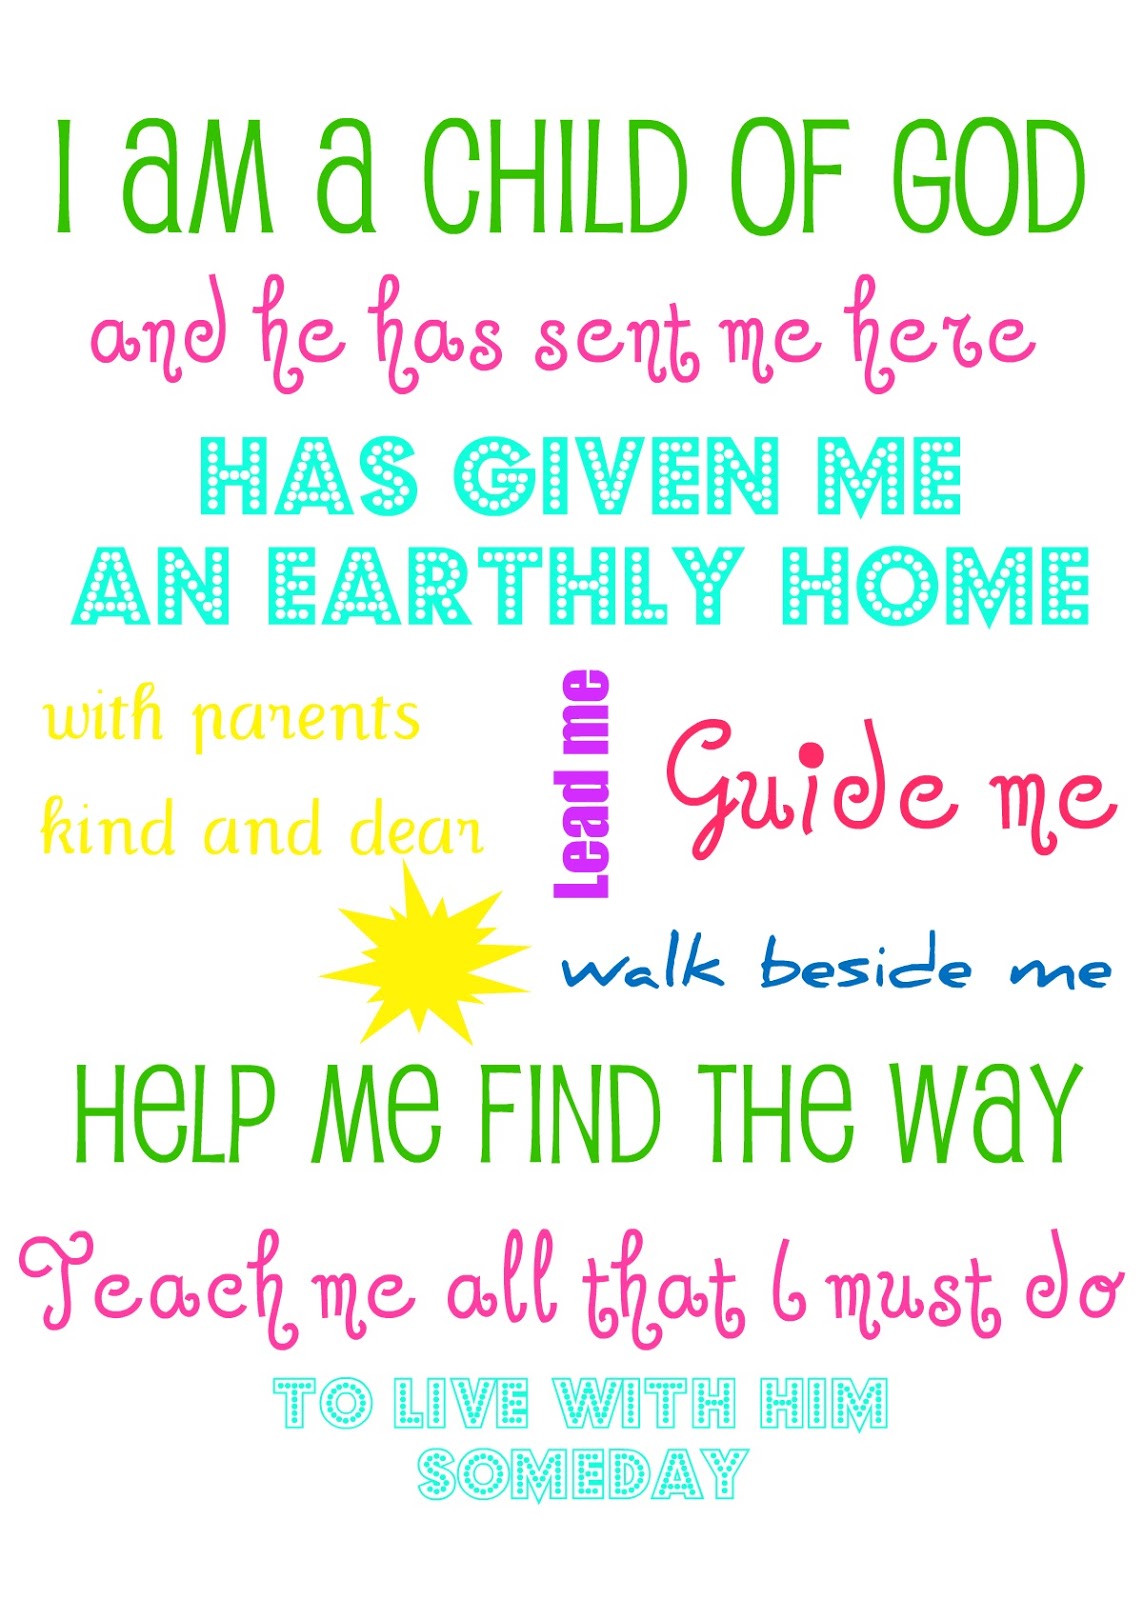 lynette-s-creations-free-i-am-a-child-of-god-printable